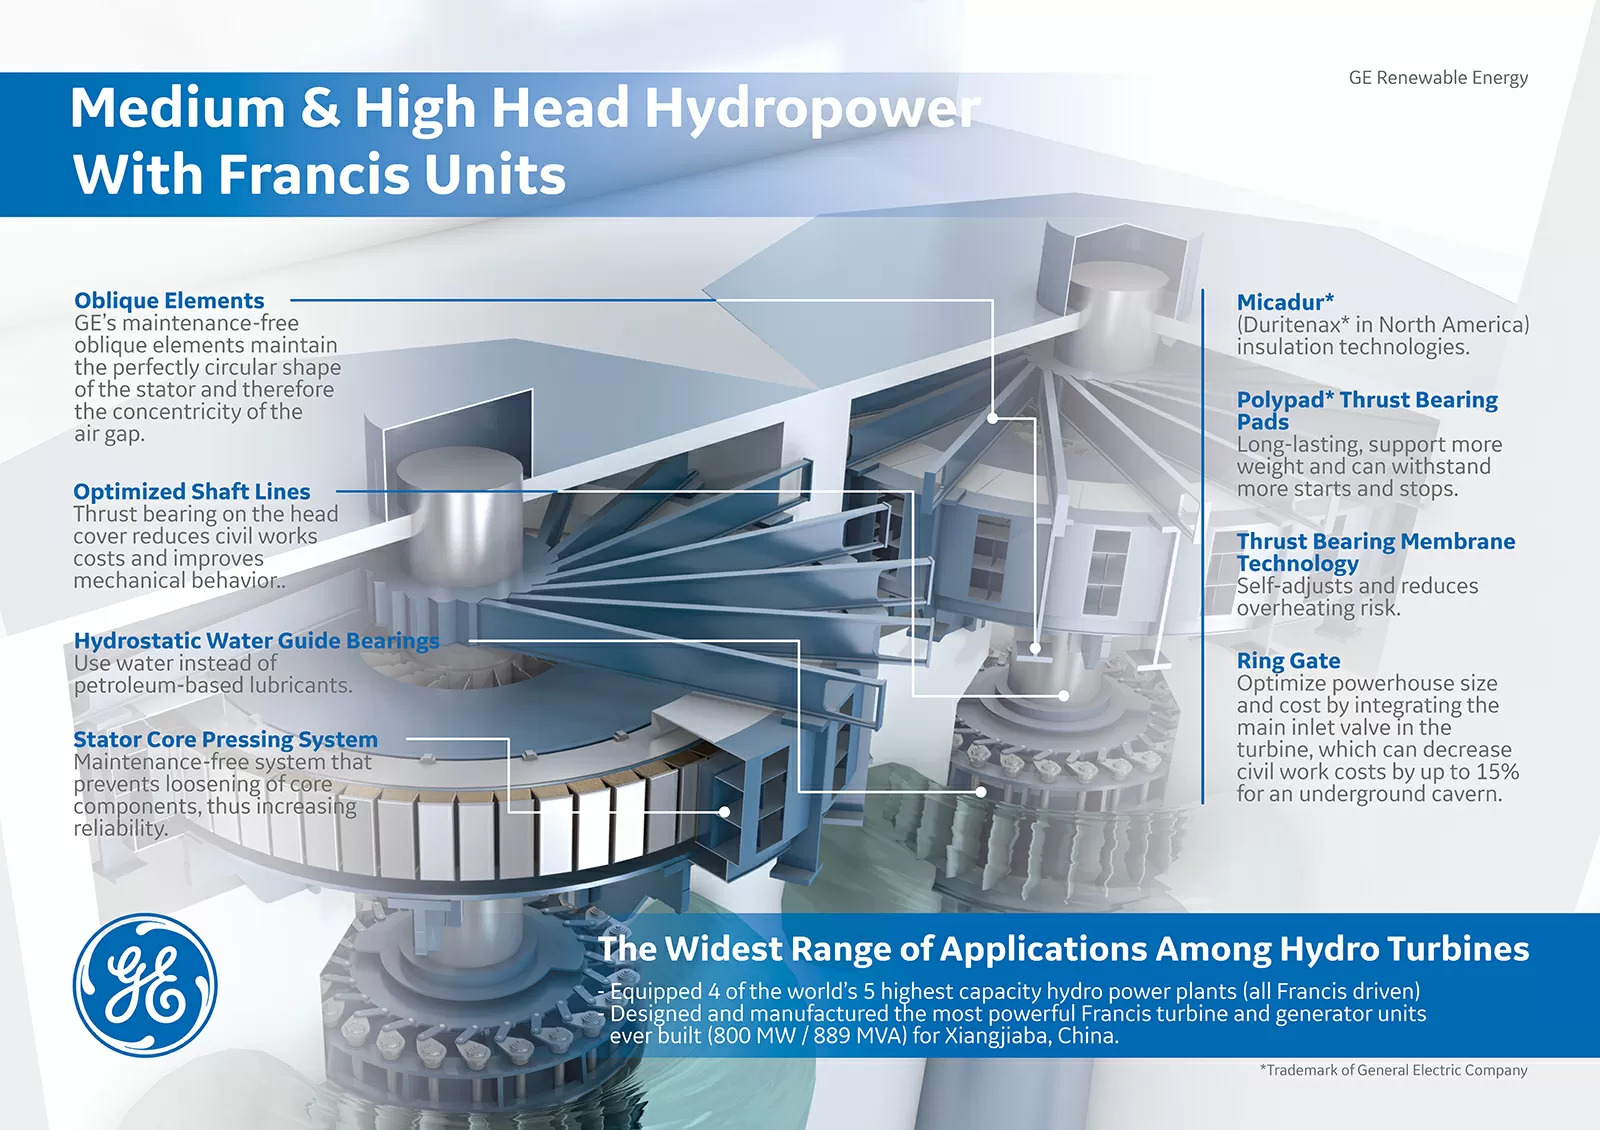 GE-Poster-Hydro-Francis-Technology-Low-Res.jpg